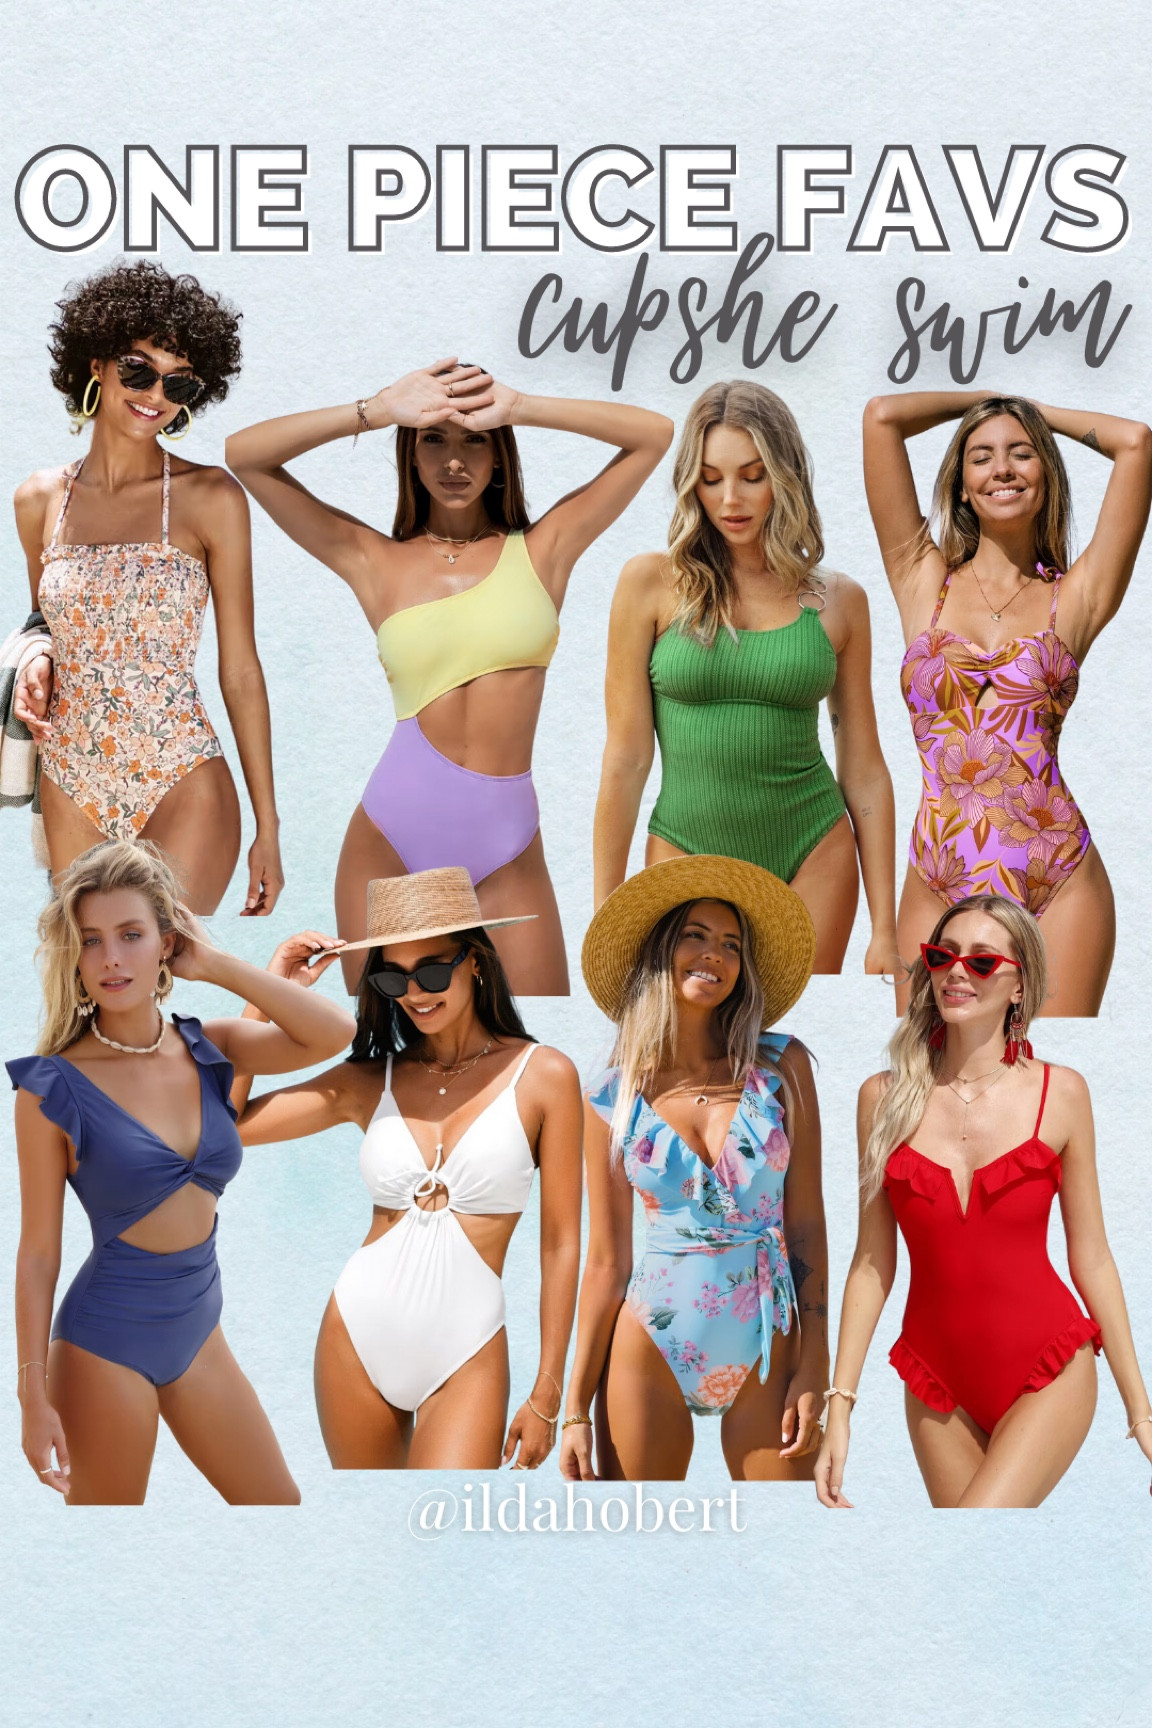 Where to buy petite swimwear (and what to look for)